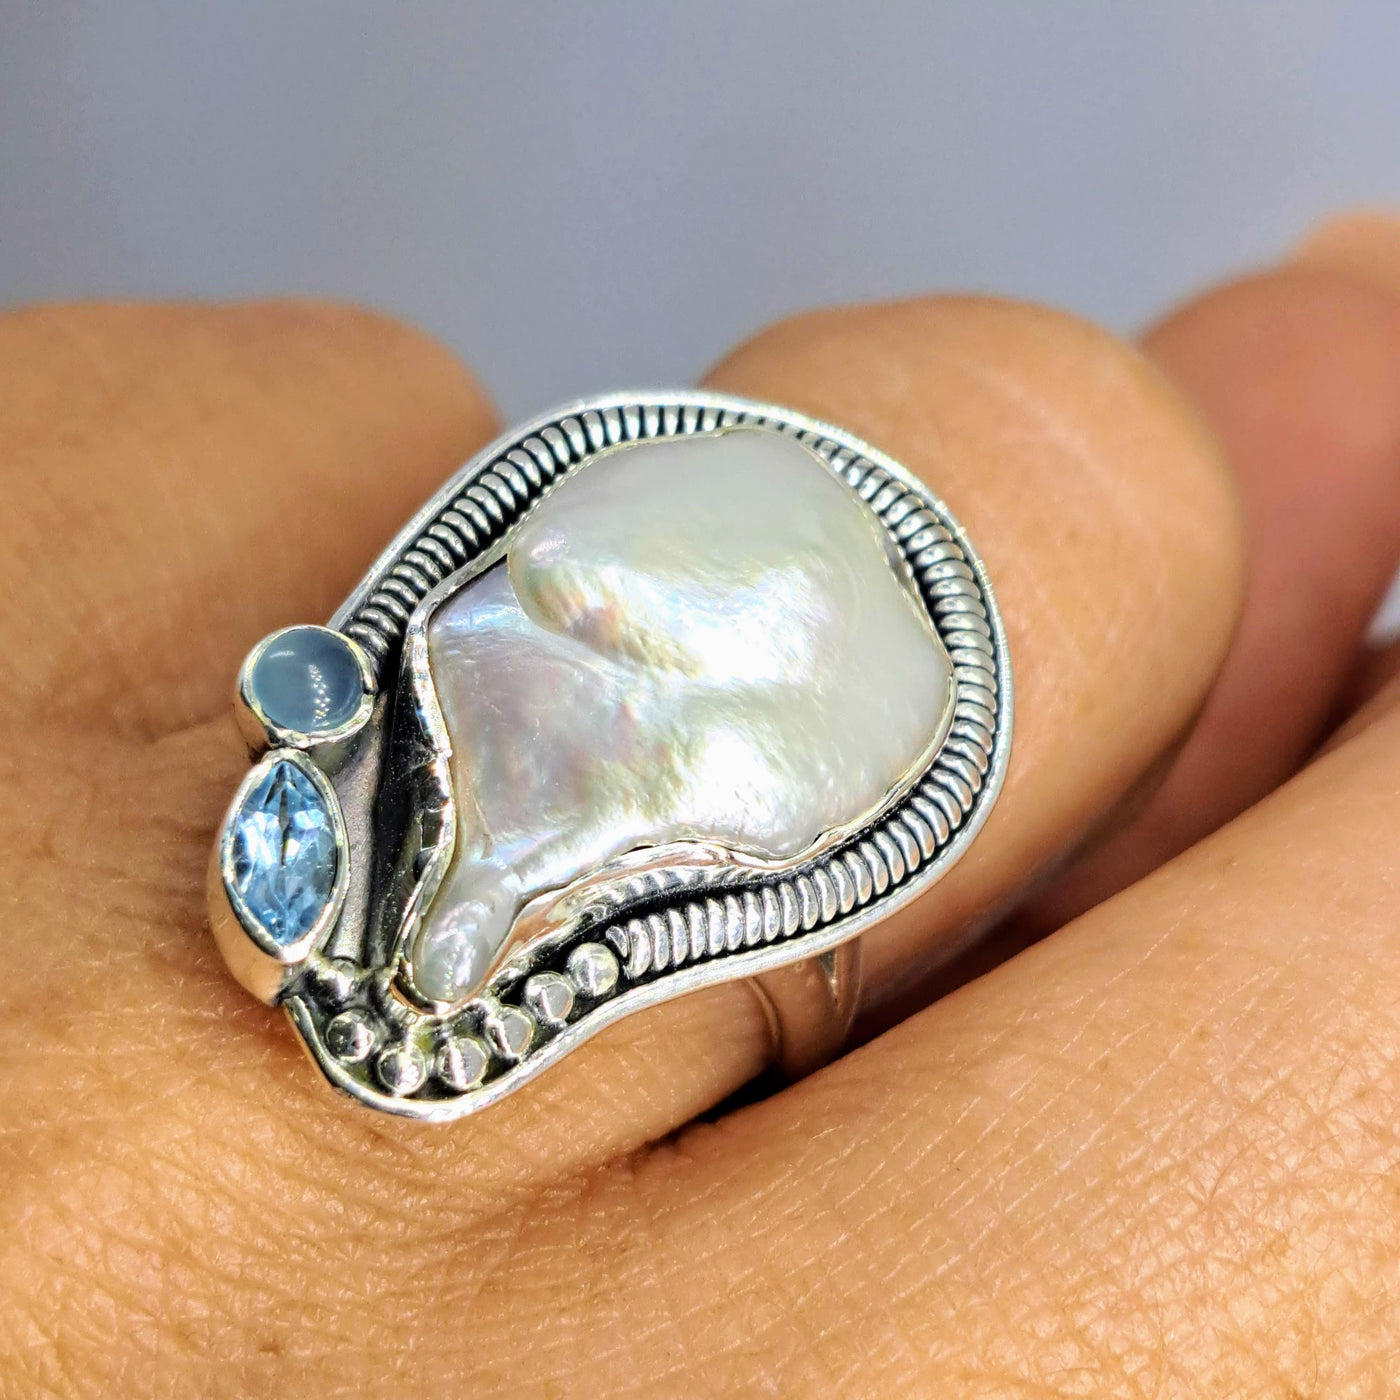 "Icing On The Cake" Sz 9 Ring - Pearl, Chalcedony, Topaz, Sterling